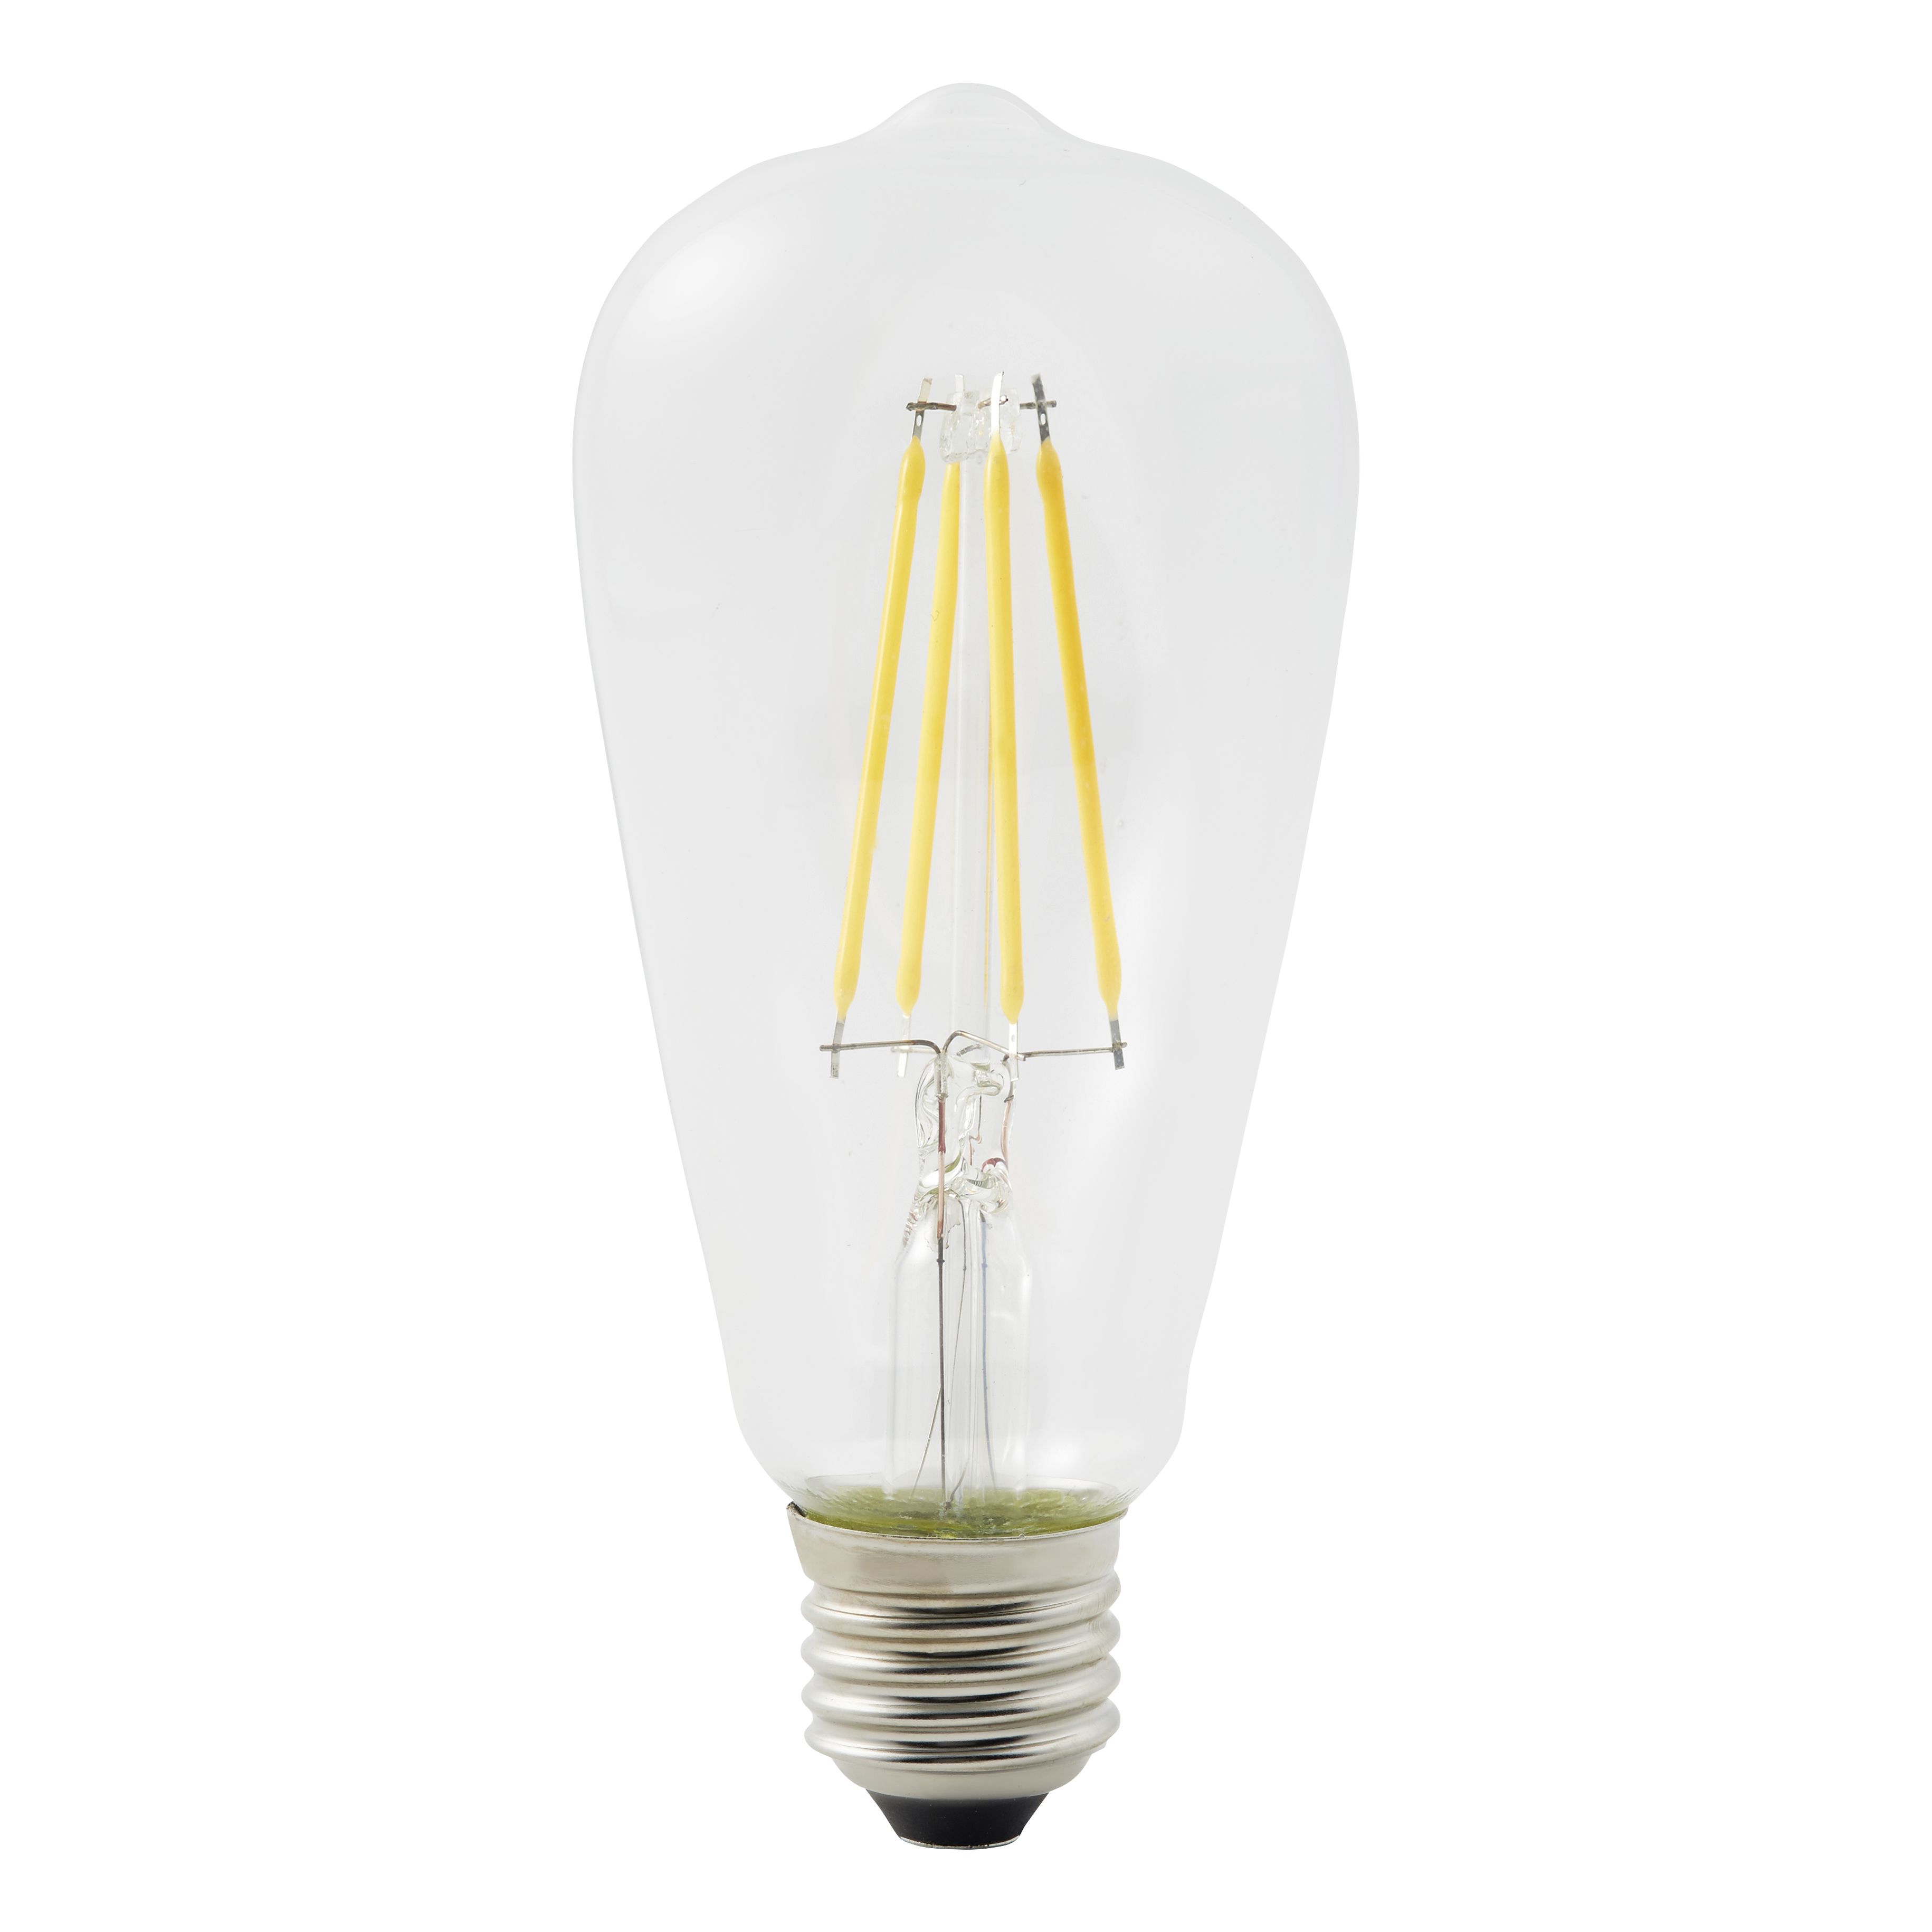 Diall 5.9W 806lm Clear ST64 Warm white LED filament Light bulb